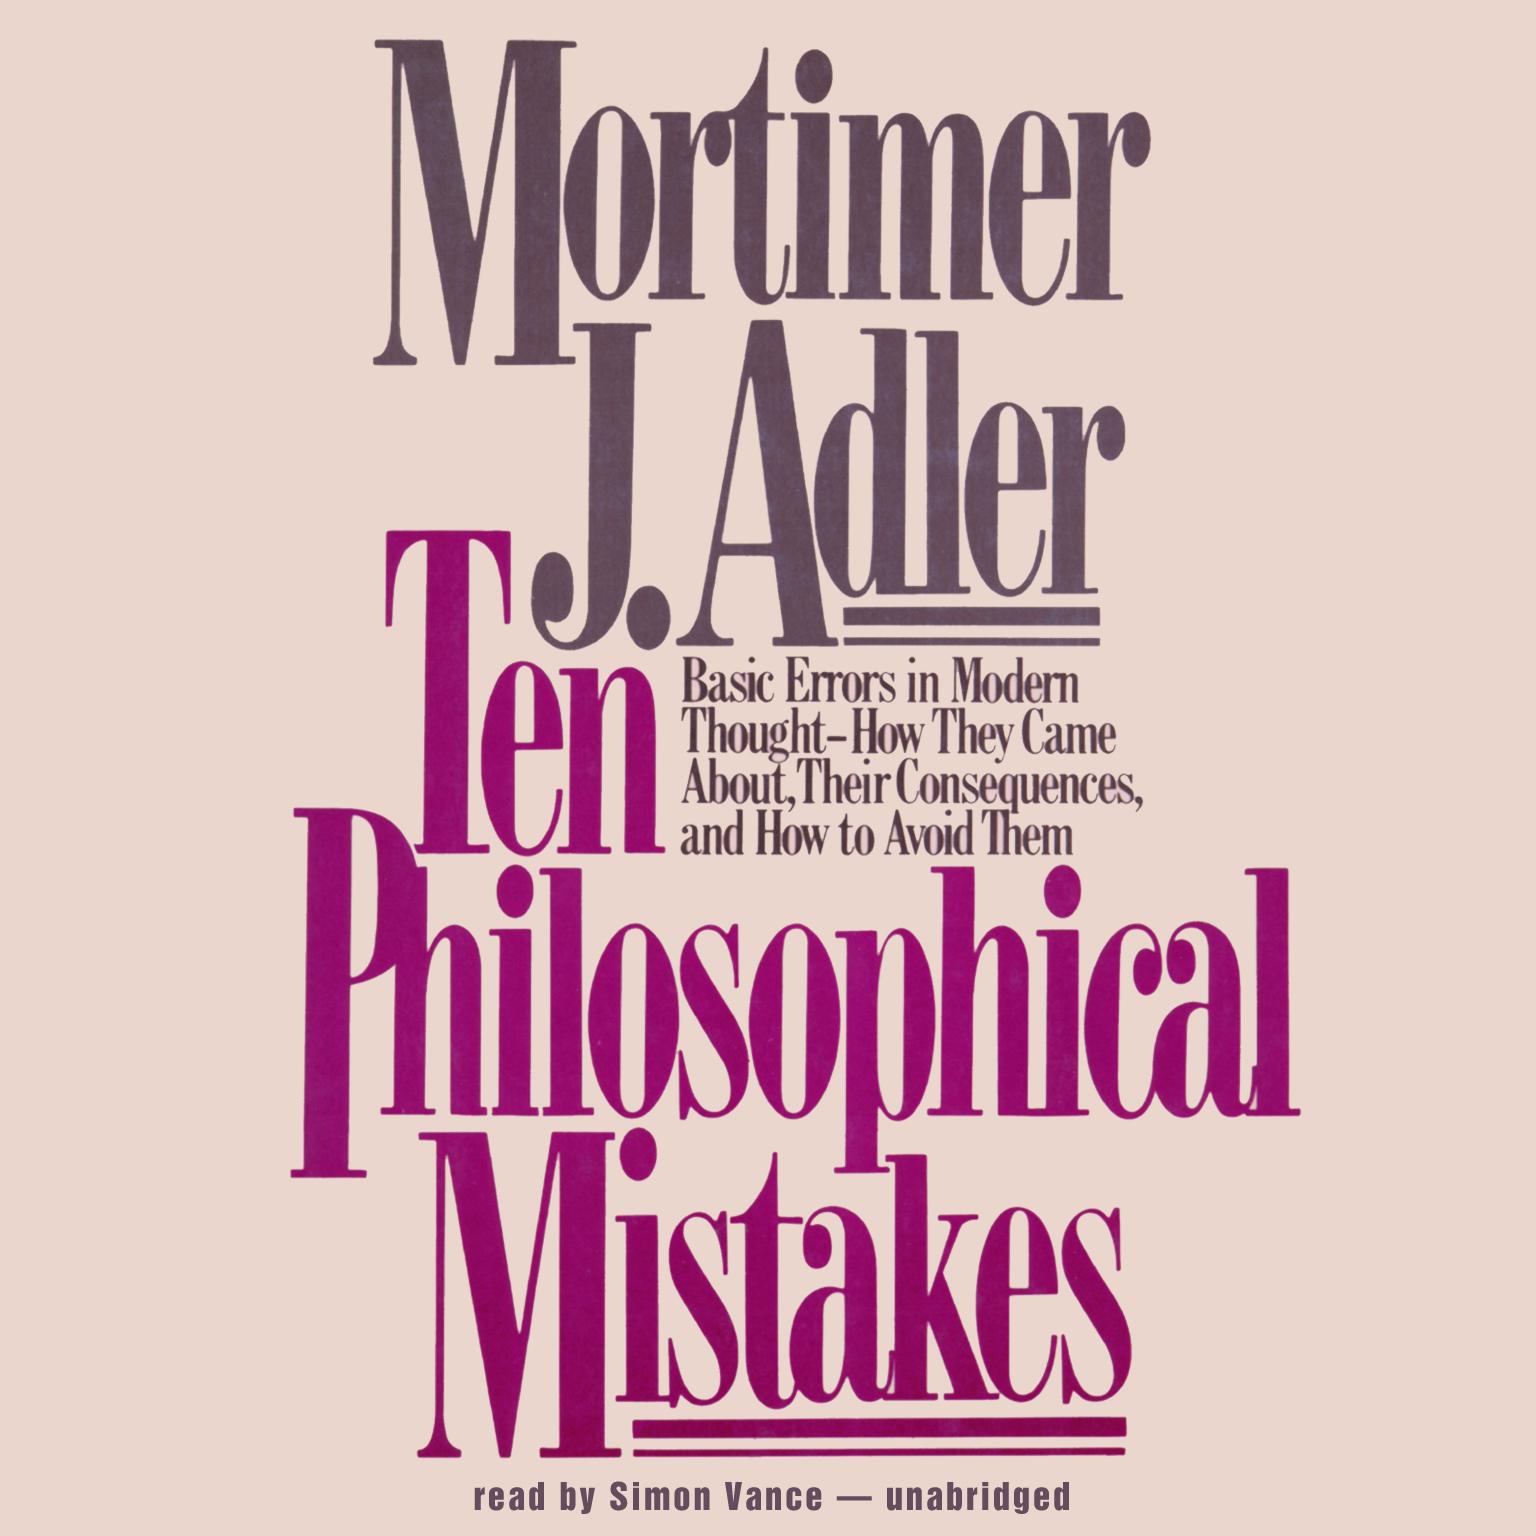 Ten Philosophical Mistakes: Basic Errors in Modern Thought—How They Came about, Their Consequences, and How to Avoid Them Audiobook, by Mortimer J. Adler